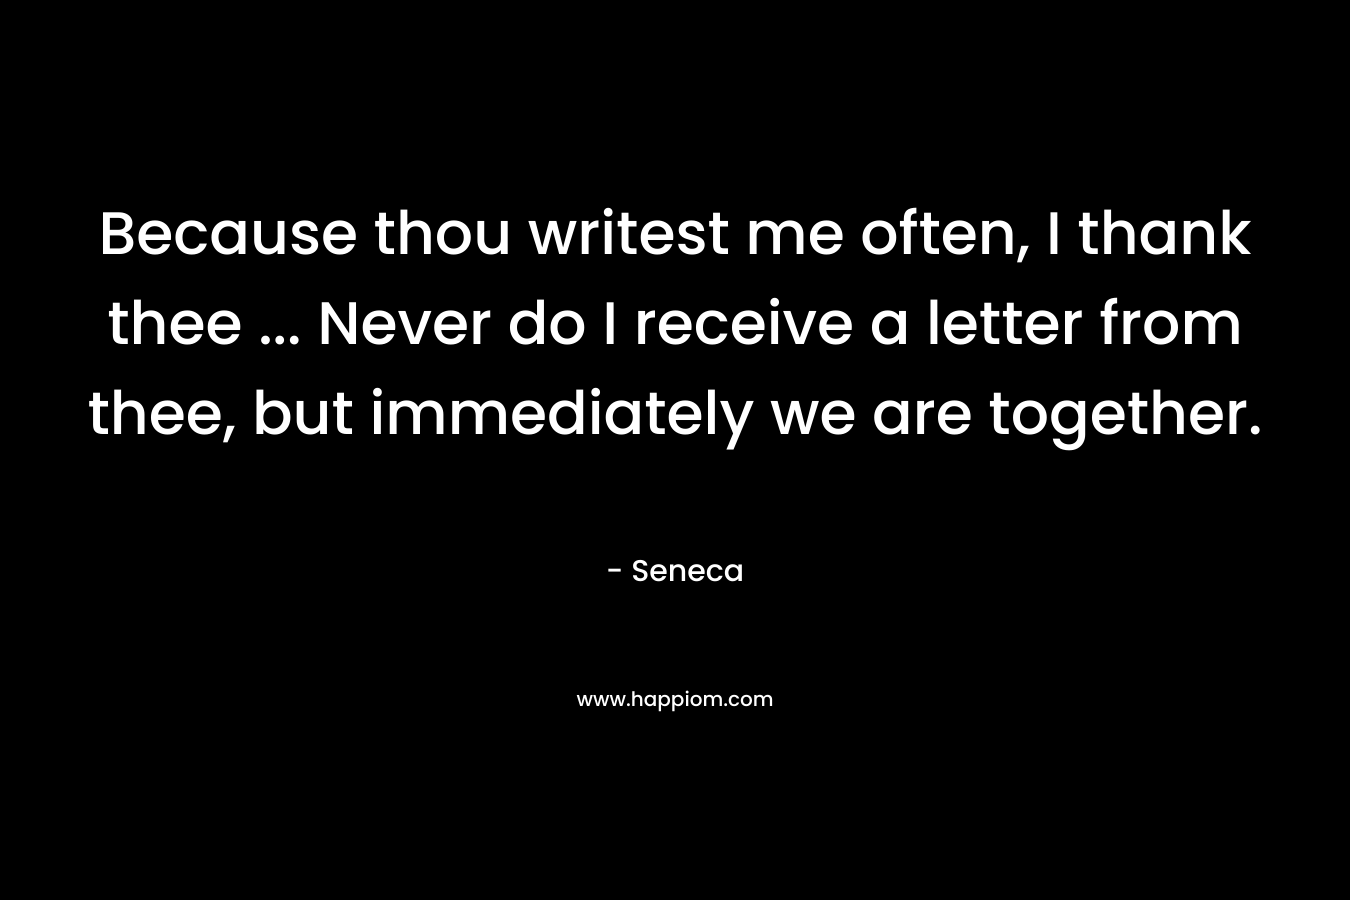 Because thou writest me often, I thank thee ... Never do I receive a letter from thee, but immediately we are together.